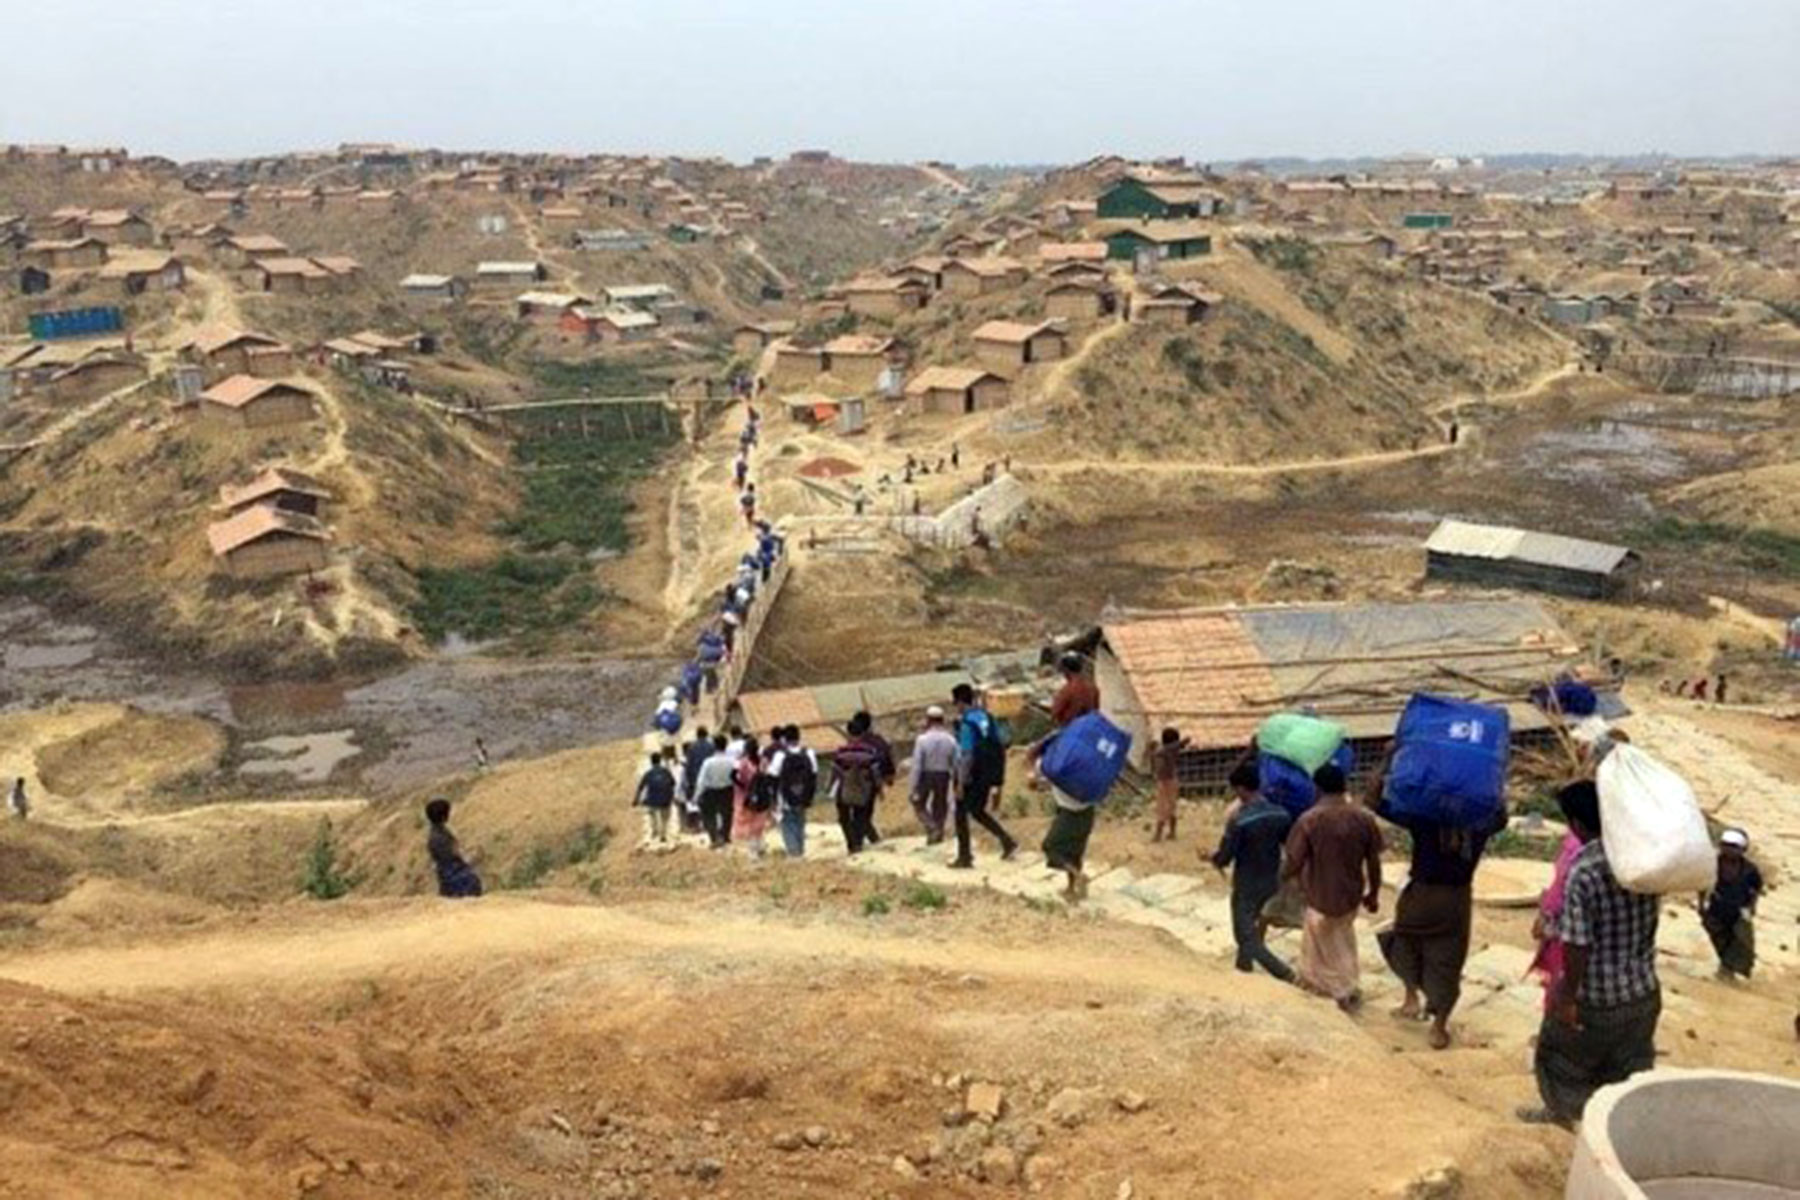 LWF has been planting trees in the Rohingya camp and nearby host communities since the beginning of its project work in 2019. Initially, the site was a forest, which was cleared in 2017 to accommodate the many refugees fleeing to Bangladesh. The deforestation caused landslides, extreme heat, and the depletion of water sources.